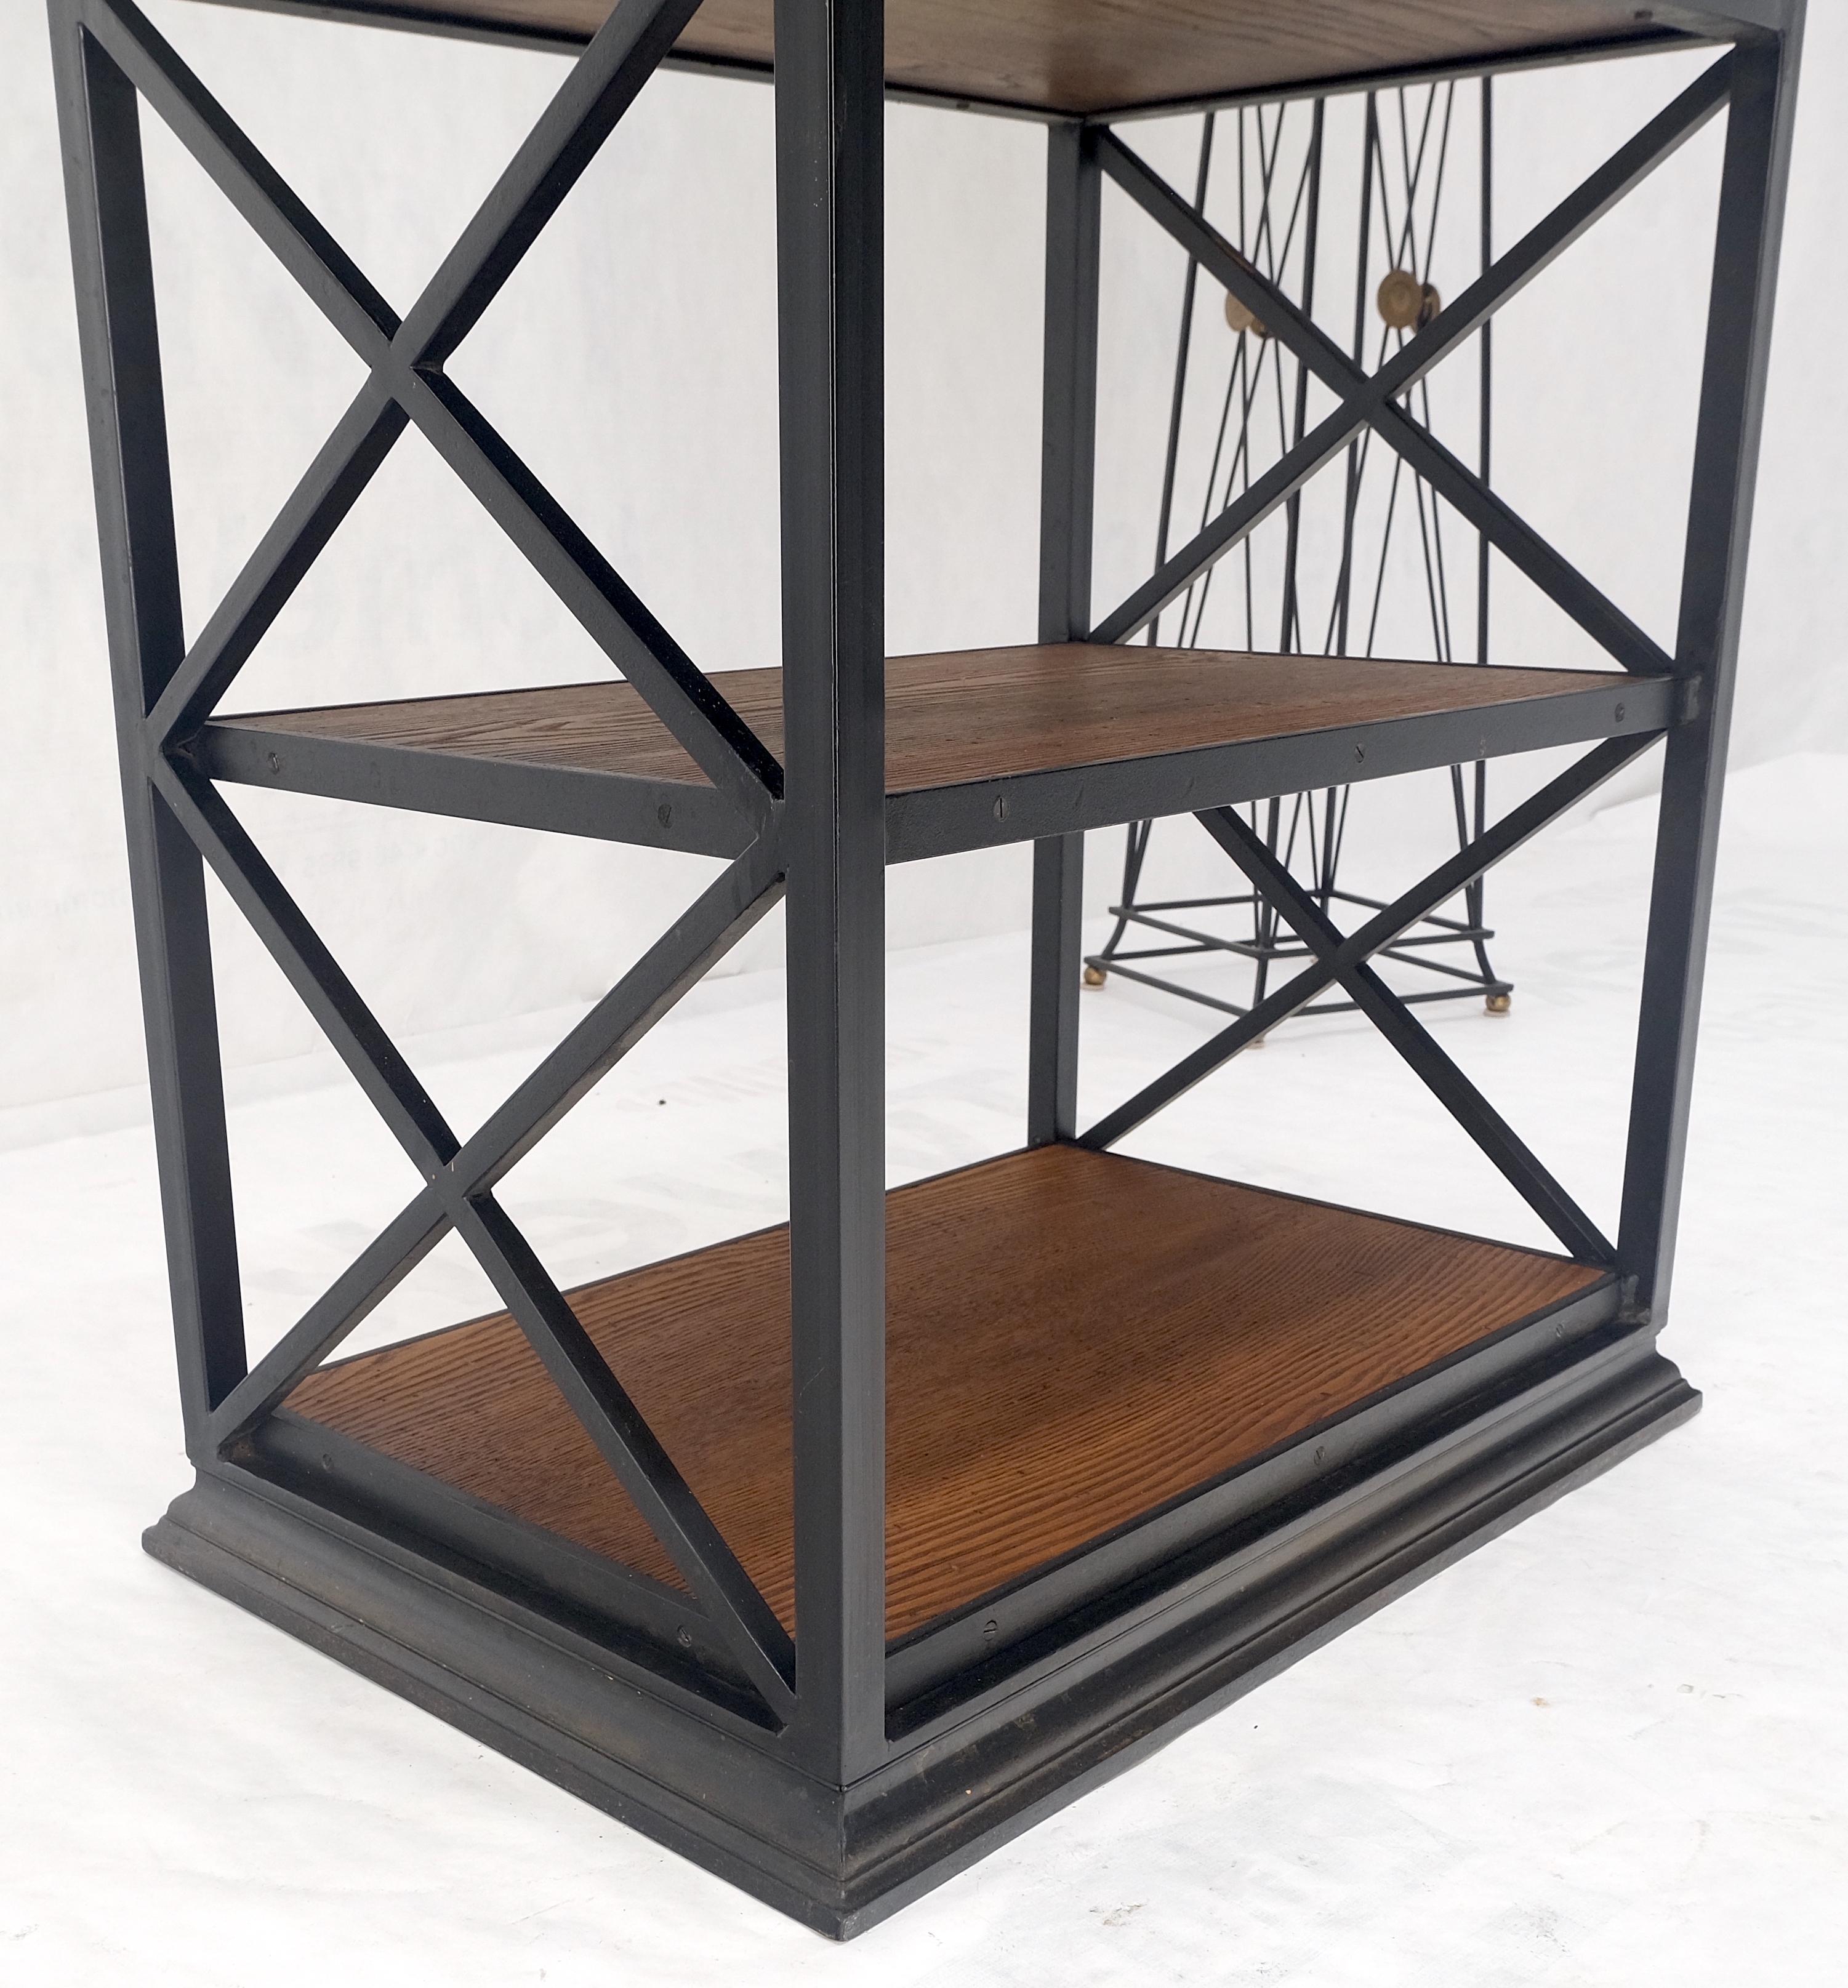 American Black Steel & Wormy Chestnut Shelves 8 Foot Tall Etagere BookCase Display MINT For Sale